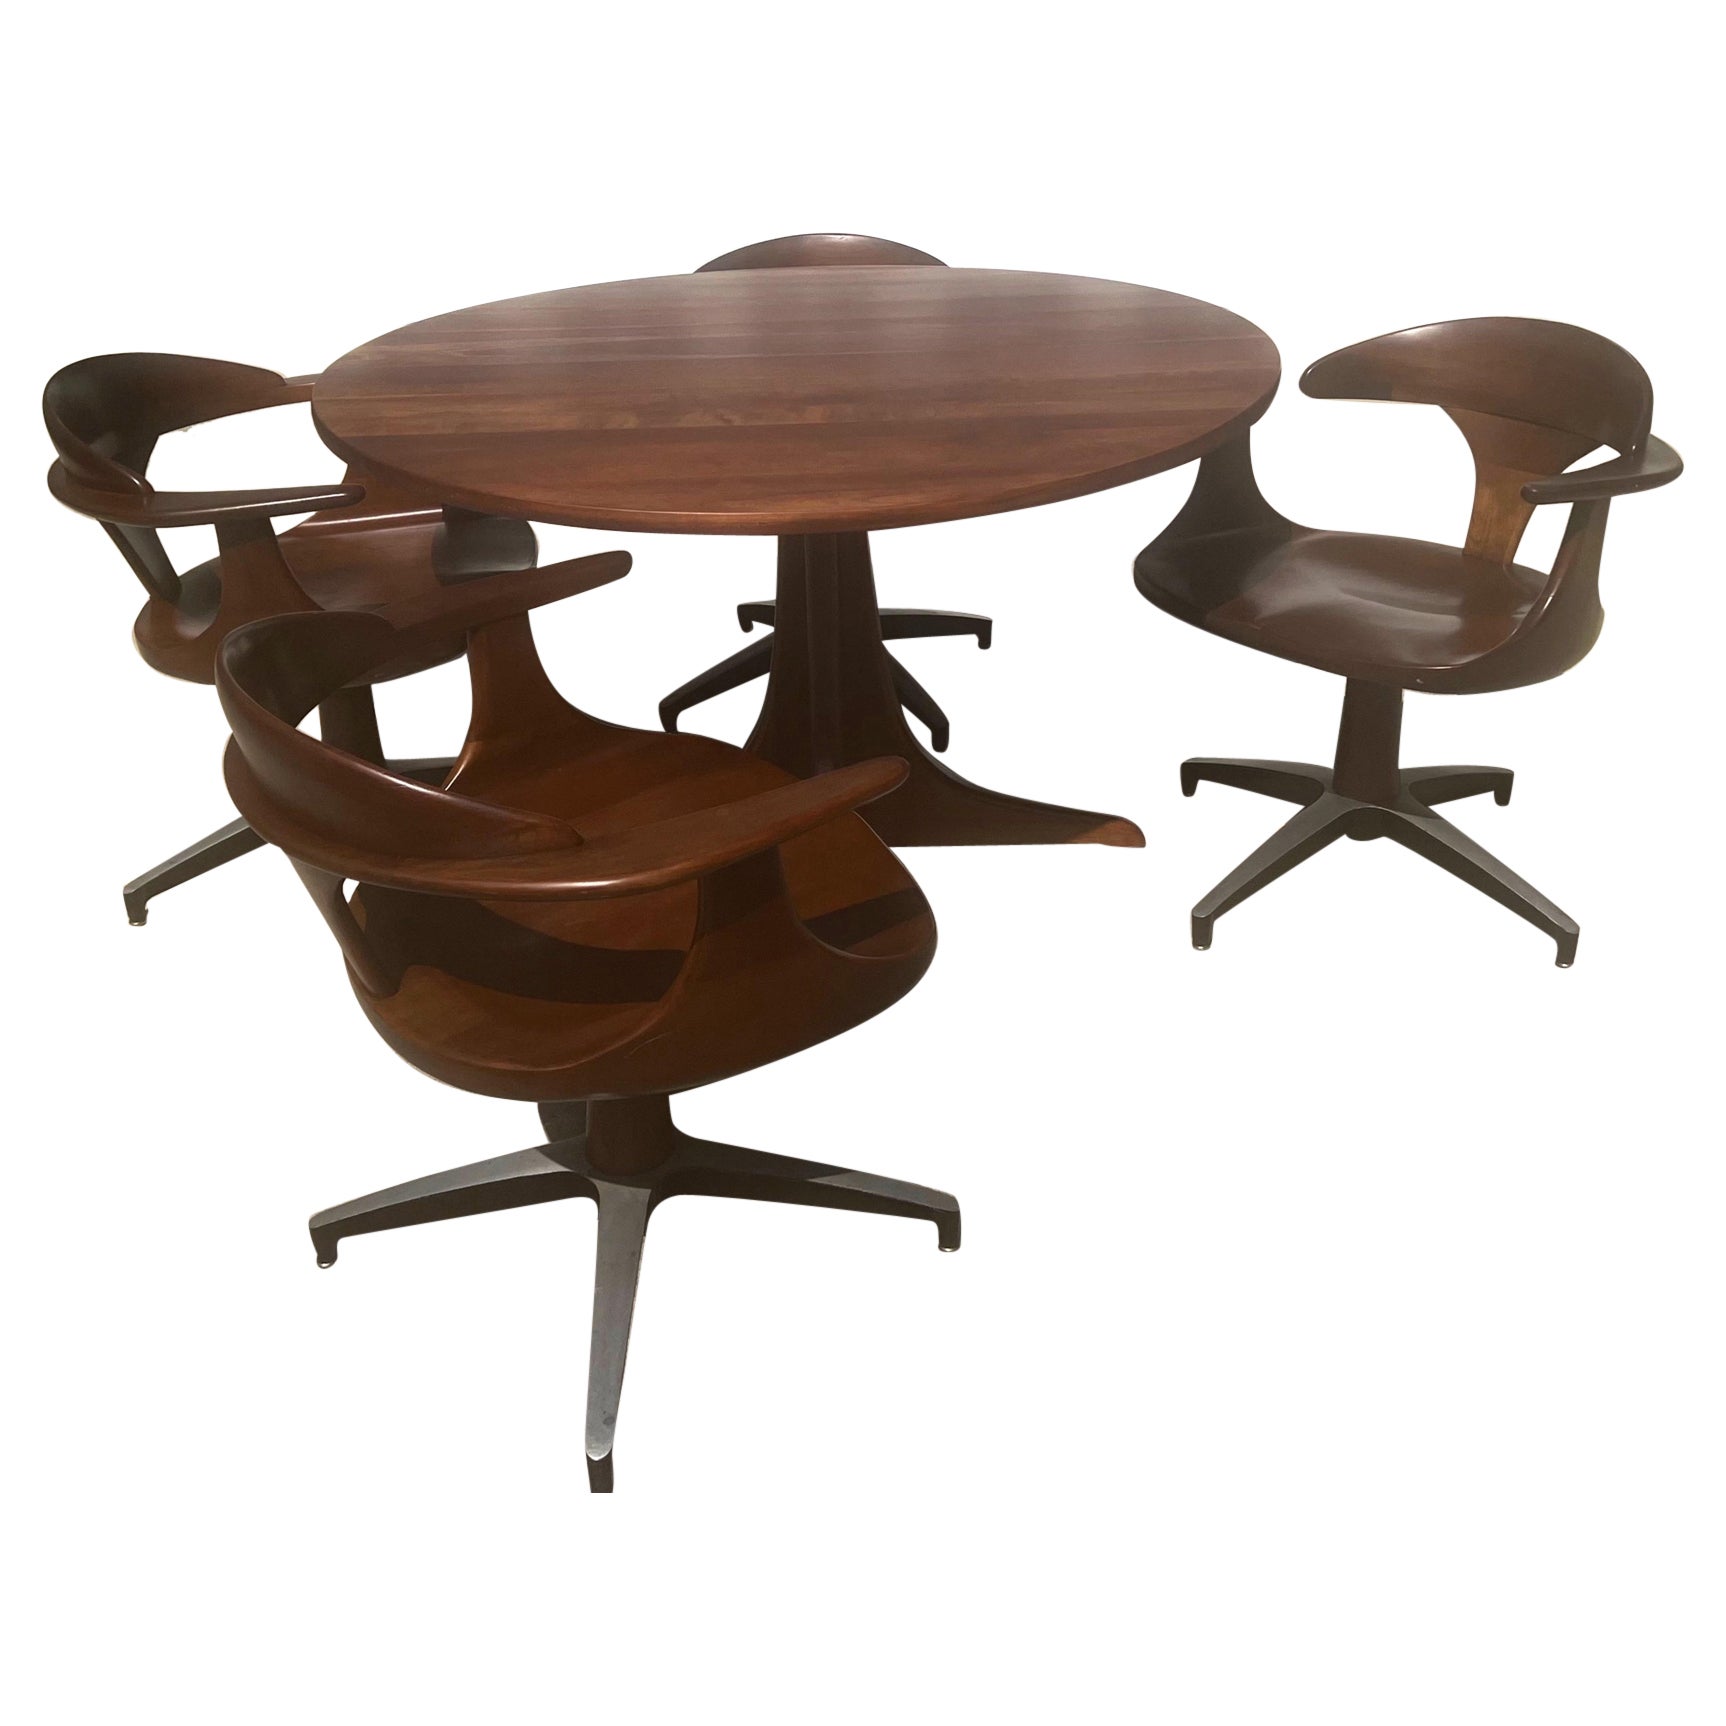 1960s Heywood Wakefield “Cliff House” Dining Table and Chairs, a Set of 5 For Sale